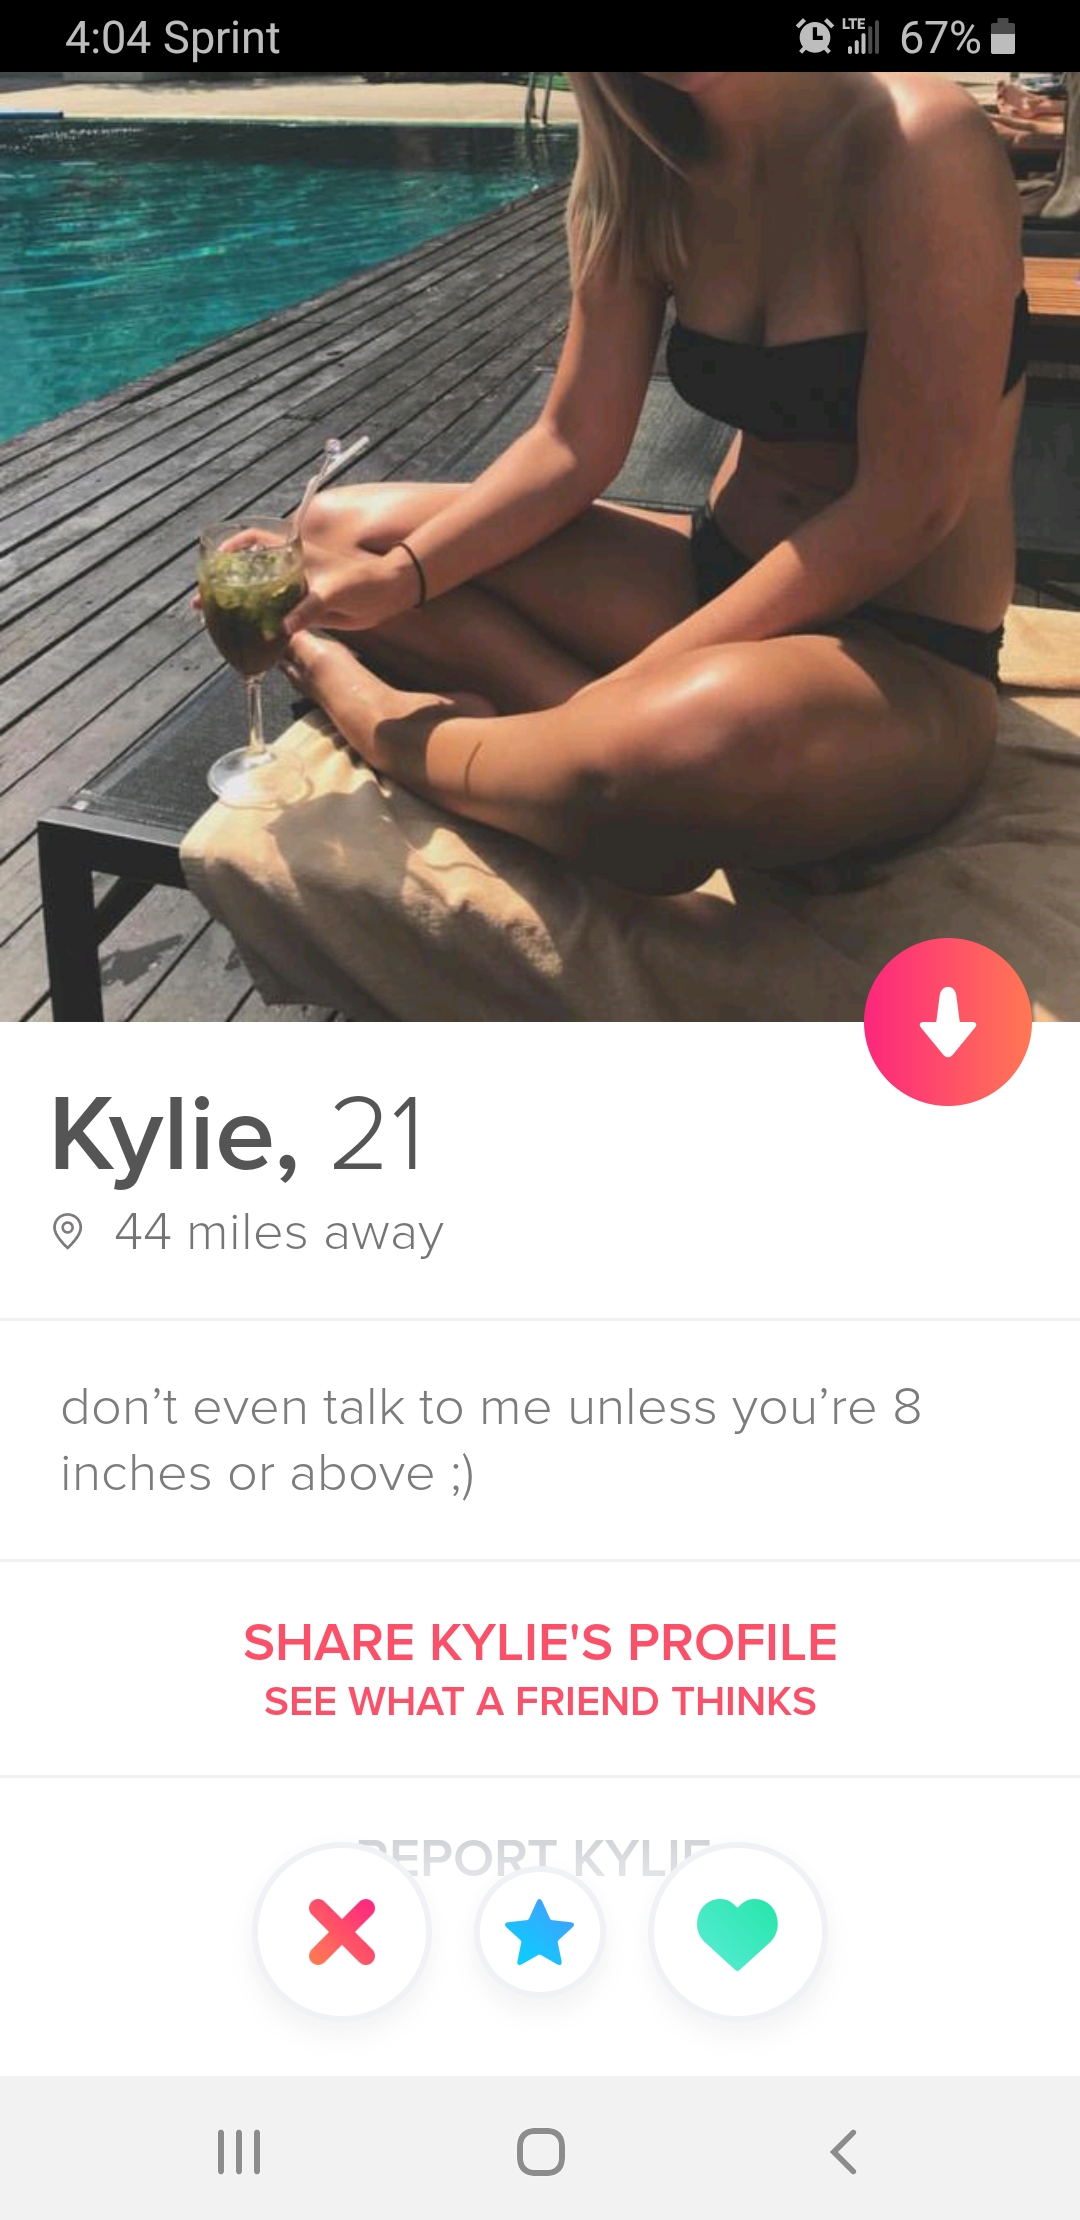 tinder - bikini - Sprint @ 67% Kylie, 21 44 miles away don't even talk to me unless you're 8 inches or above Kylie'S Profile See What A Friend Thinks Sport Kylt